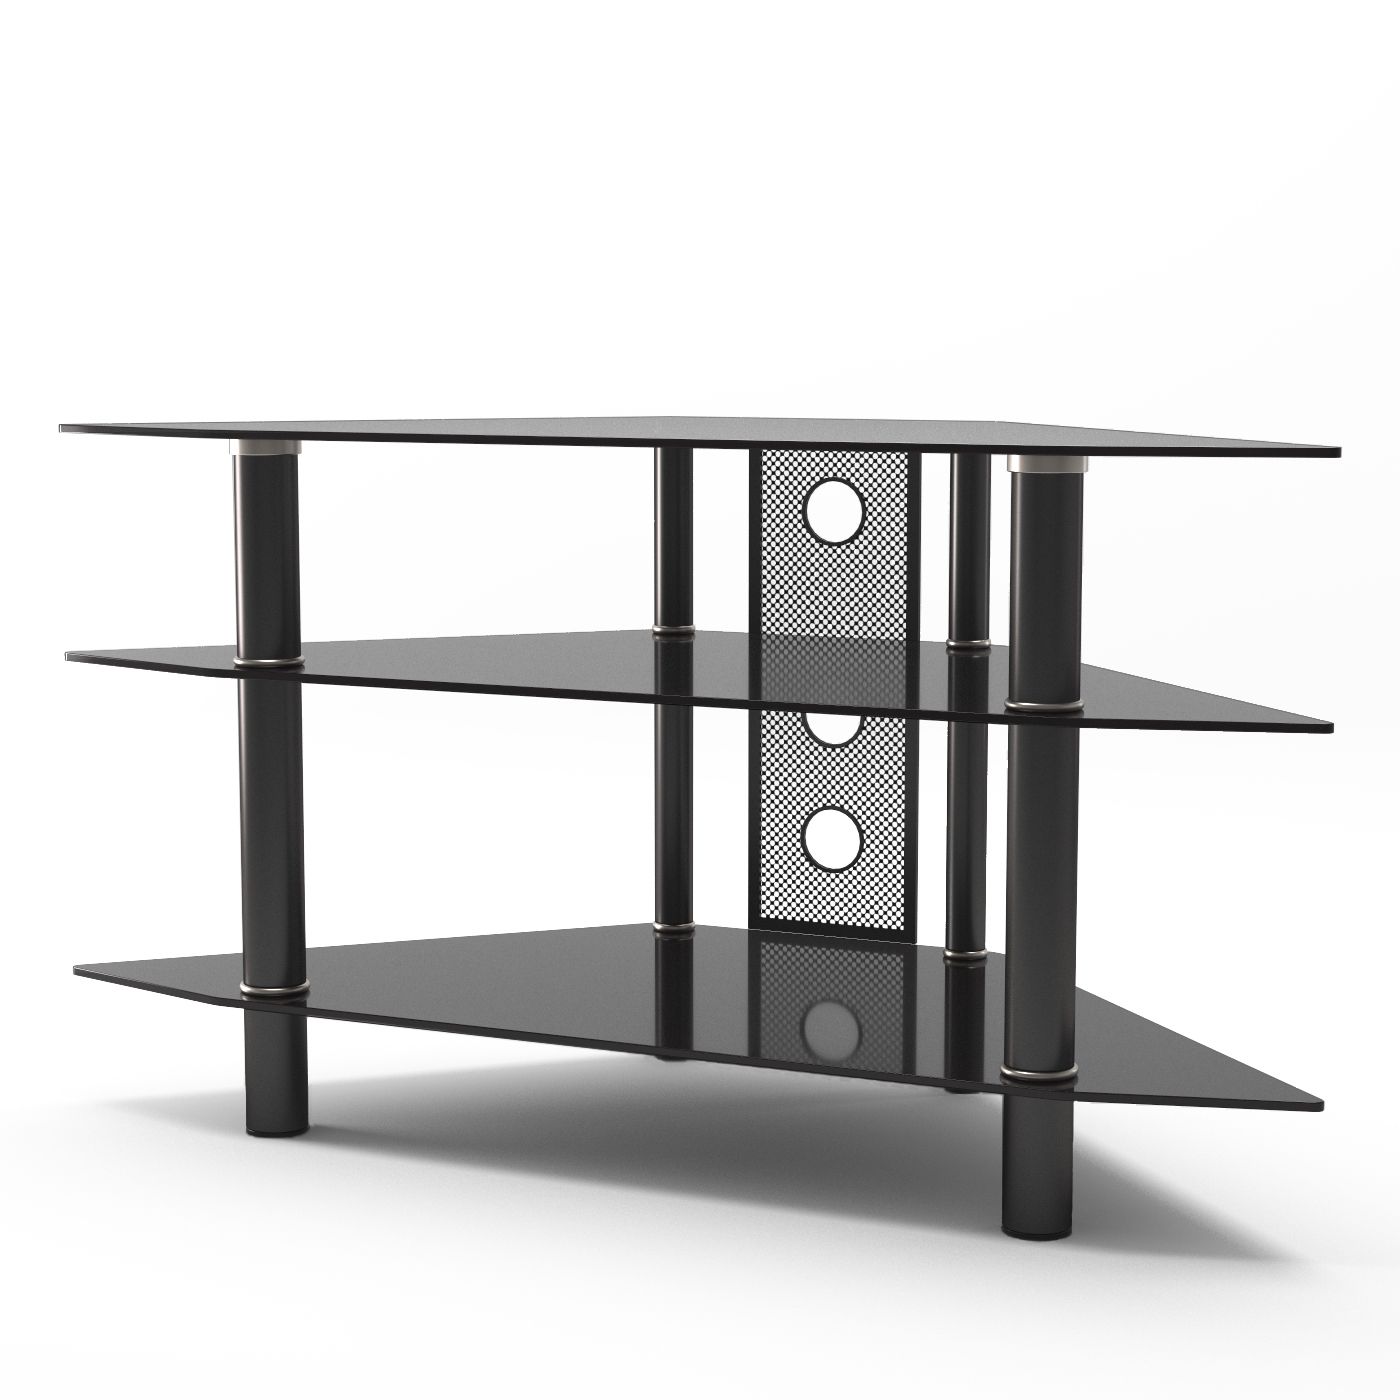 Ruby 44 Inch Corner Glass Tv Stand In Black With Cable Throughout Wood Corner Storage Console Tv Stands For Tvs Up To 55" White (View 12 of 15)